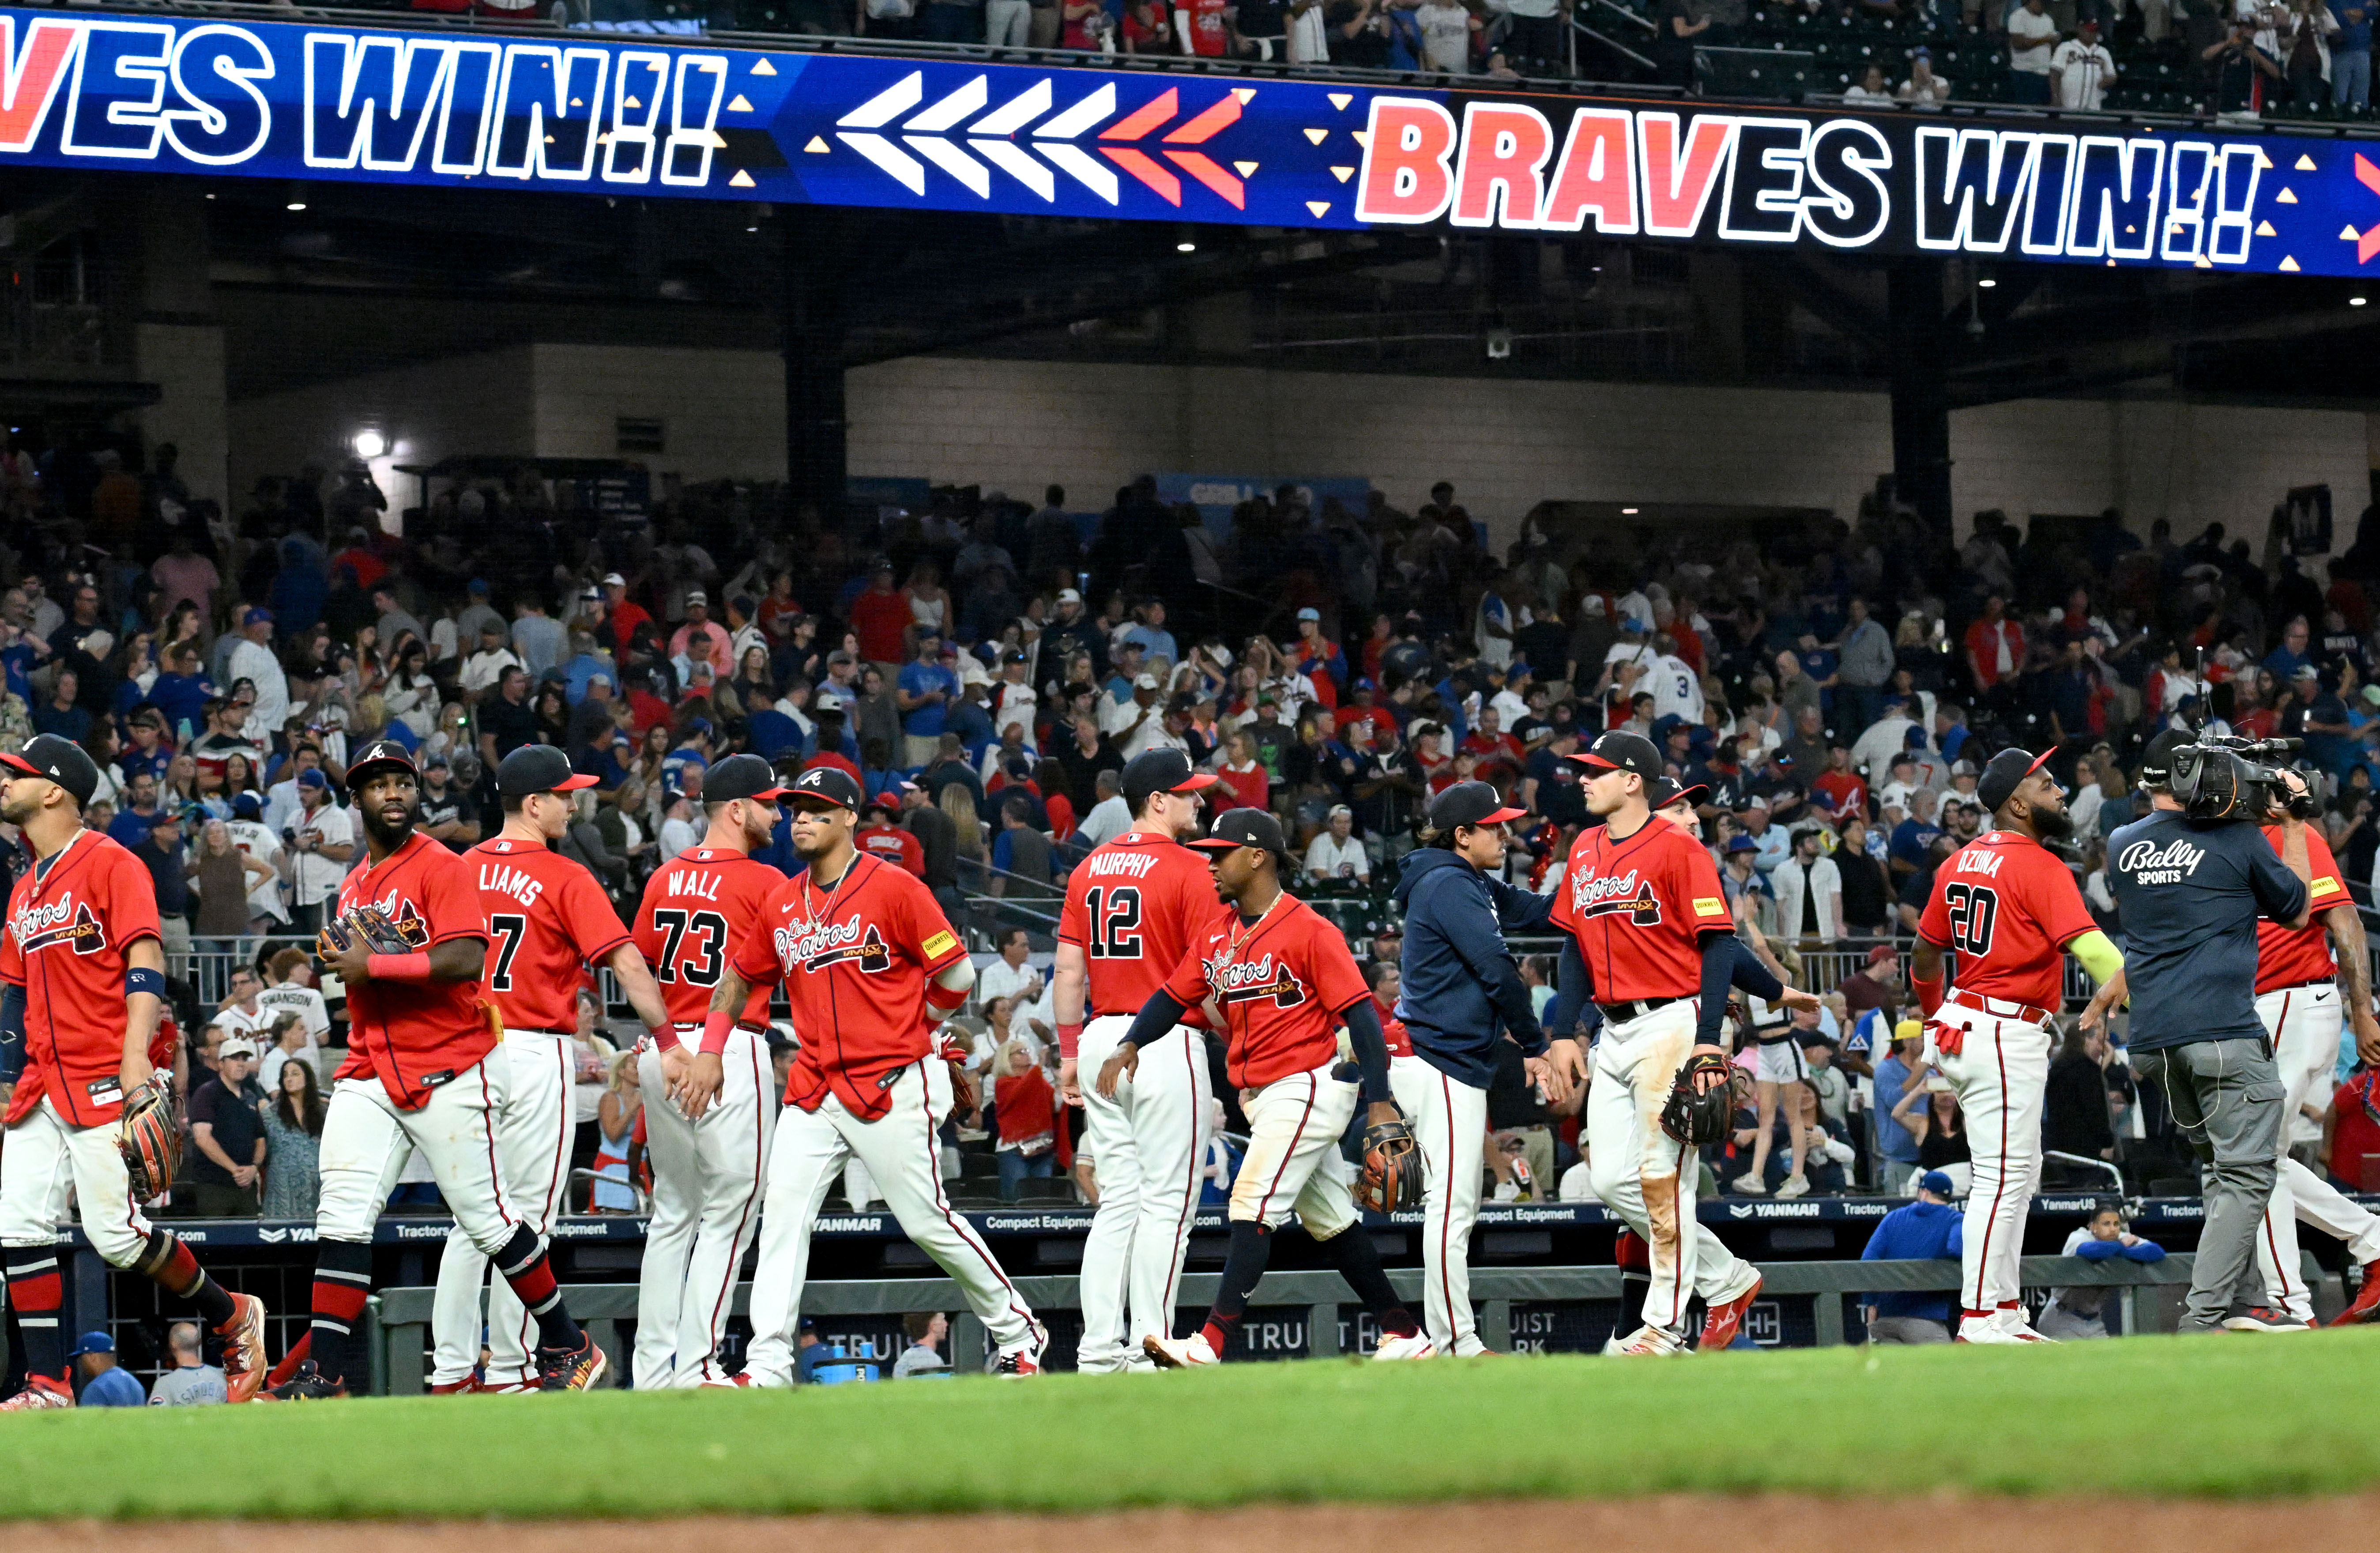 Sept. 28, 2023 game: Braves 5, Cubs 3 - Homefield advantage clinched after  sweeping Cubs